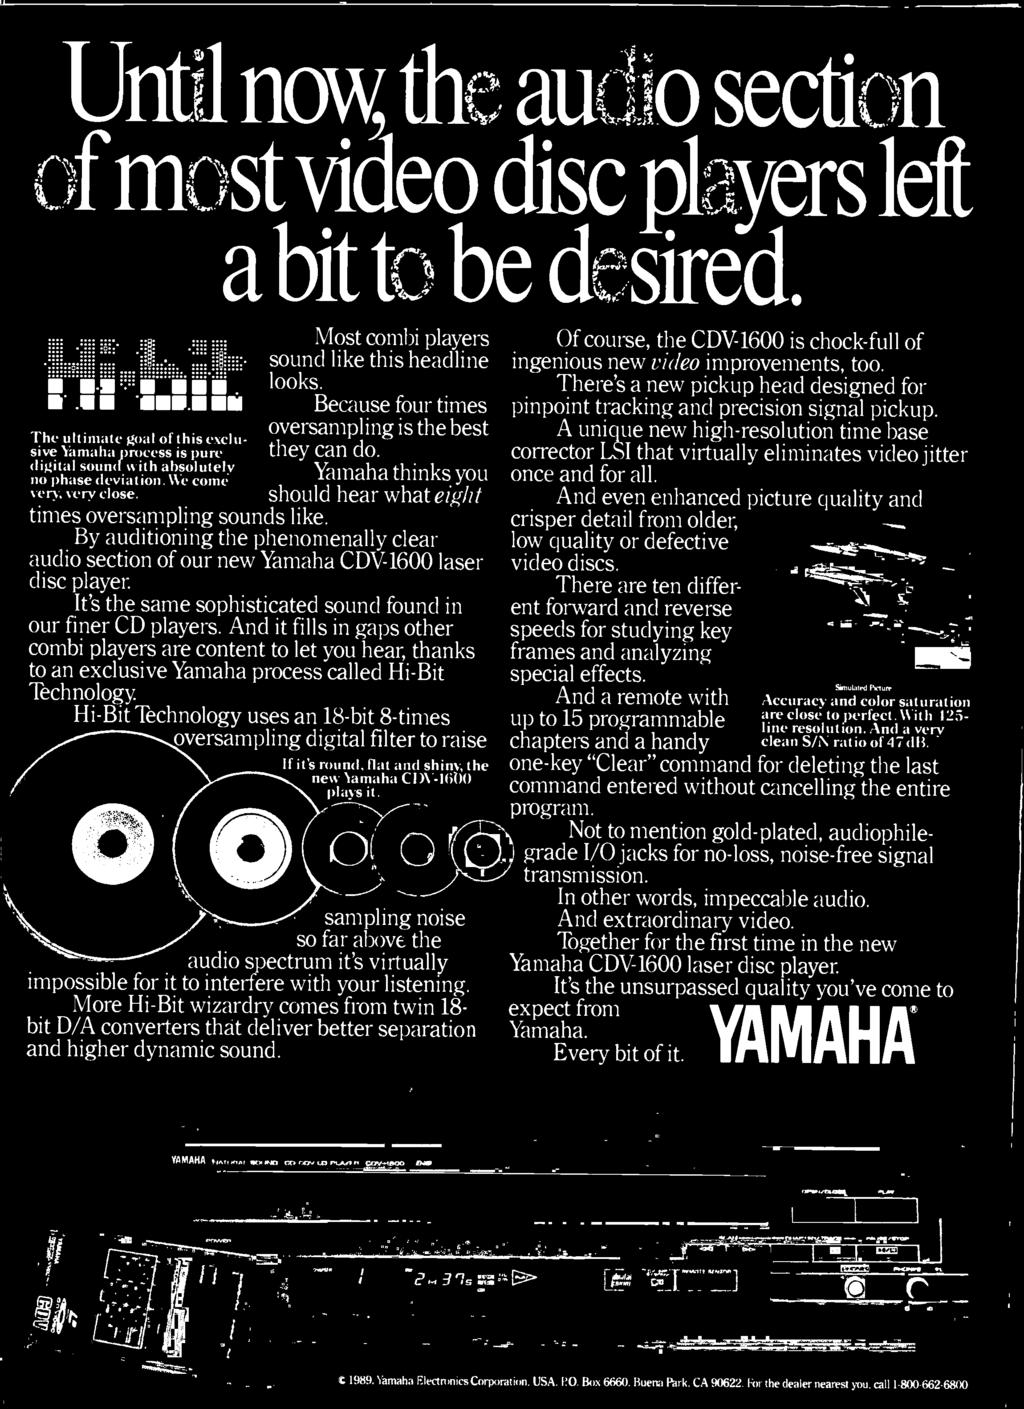 And it fills in gaps other combi players are content to let you hear, thanks to an exclusive Yamaha process called Hi -Bit Technology.